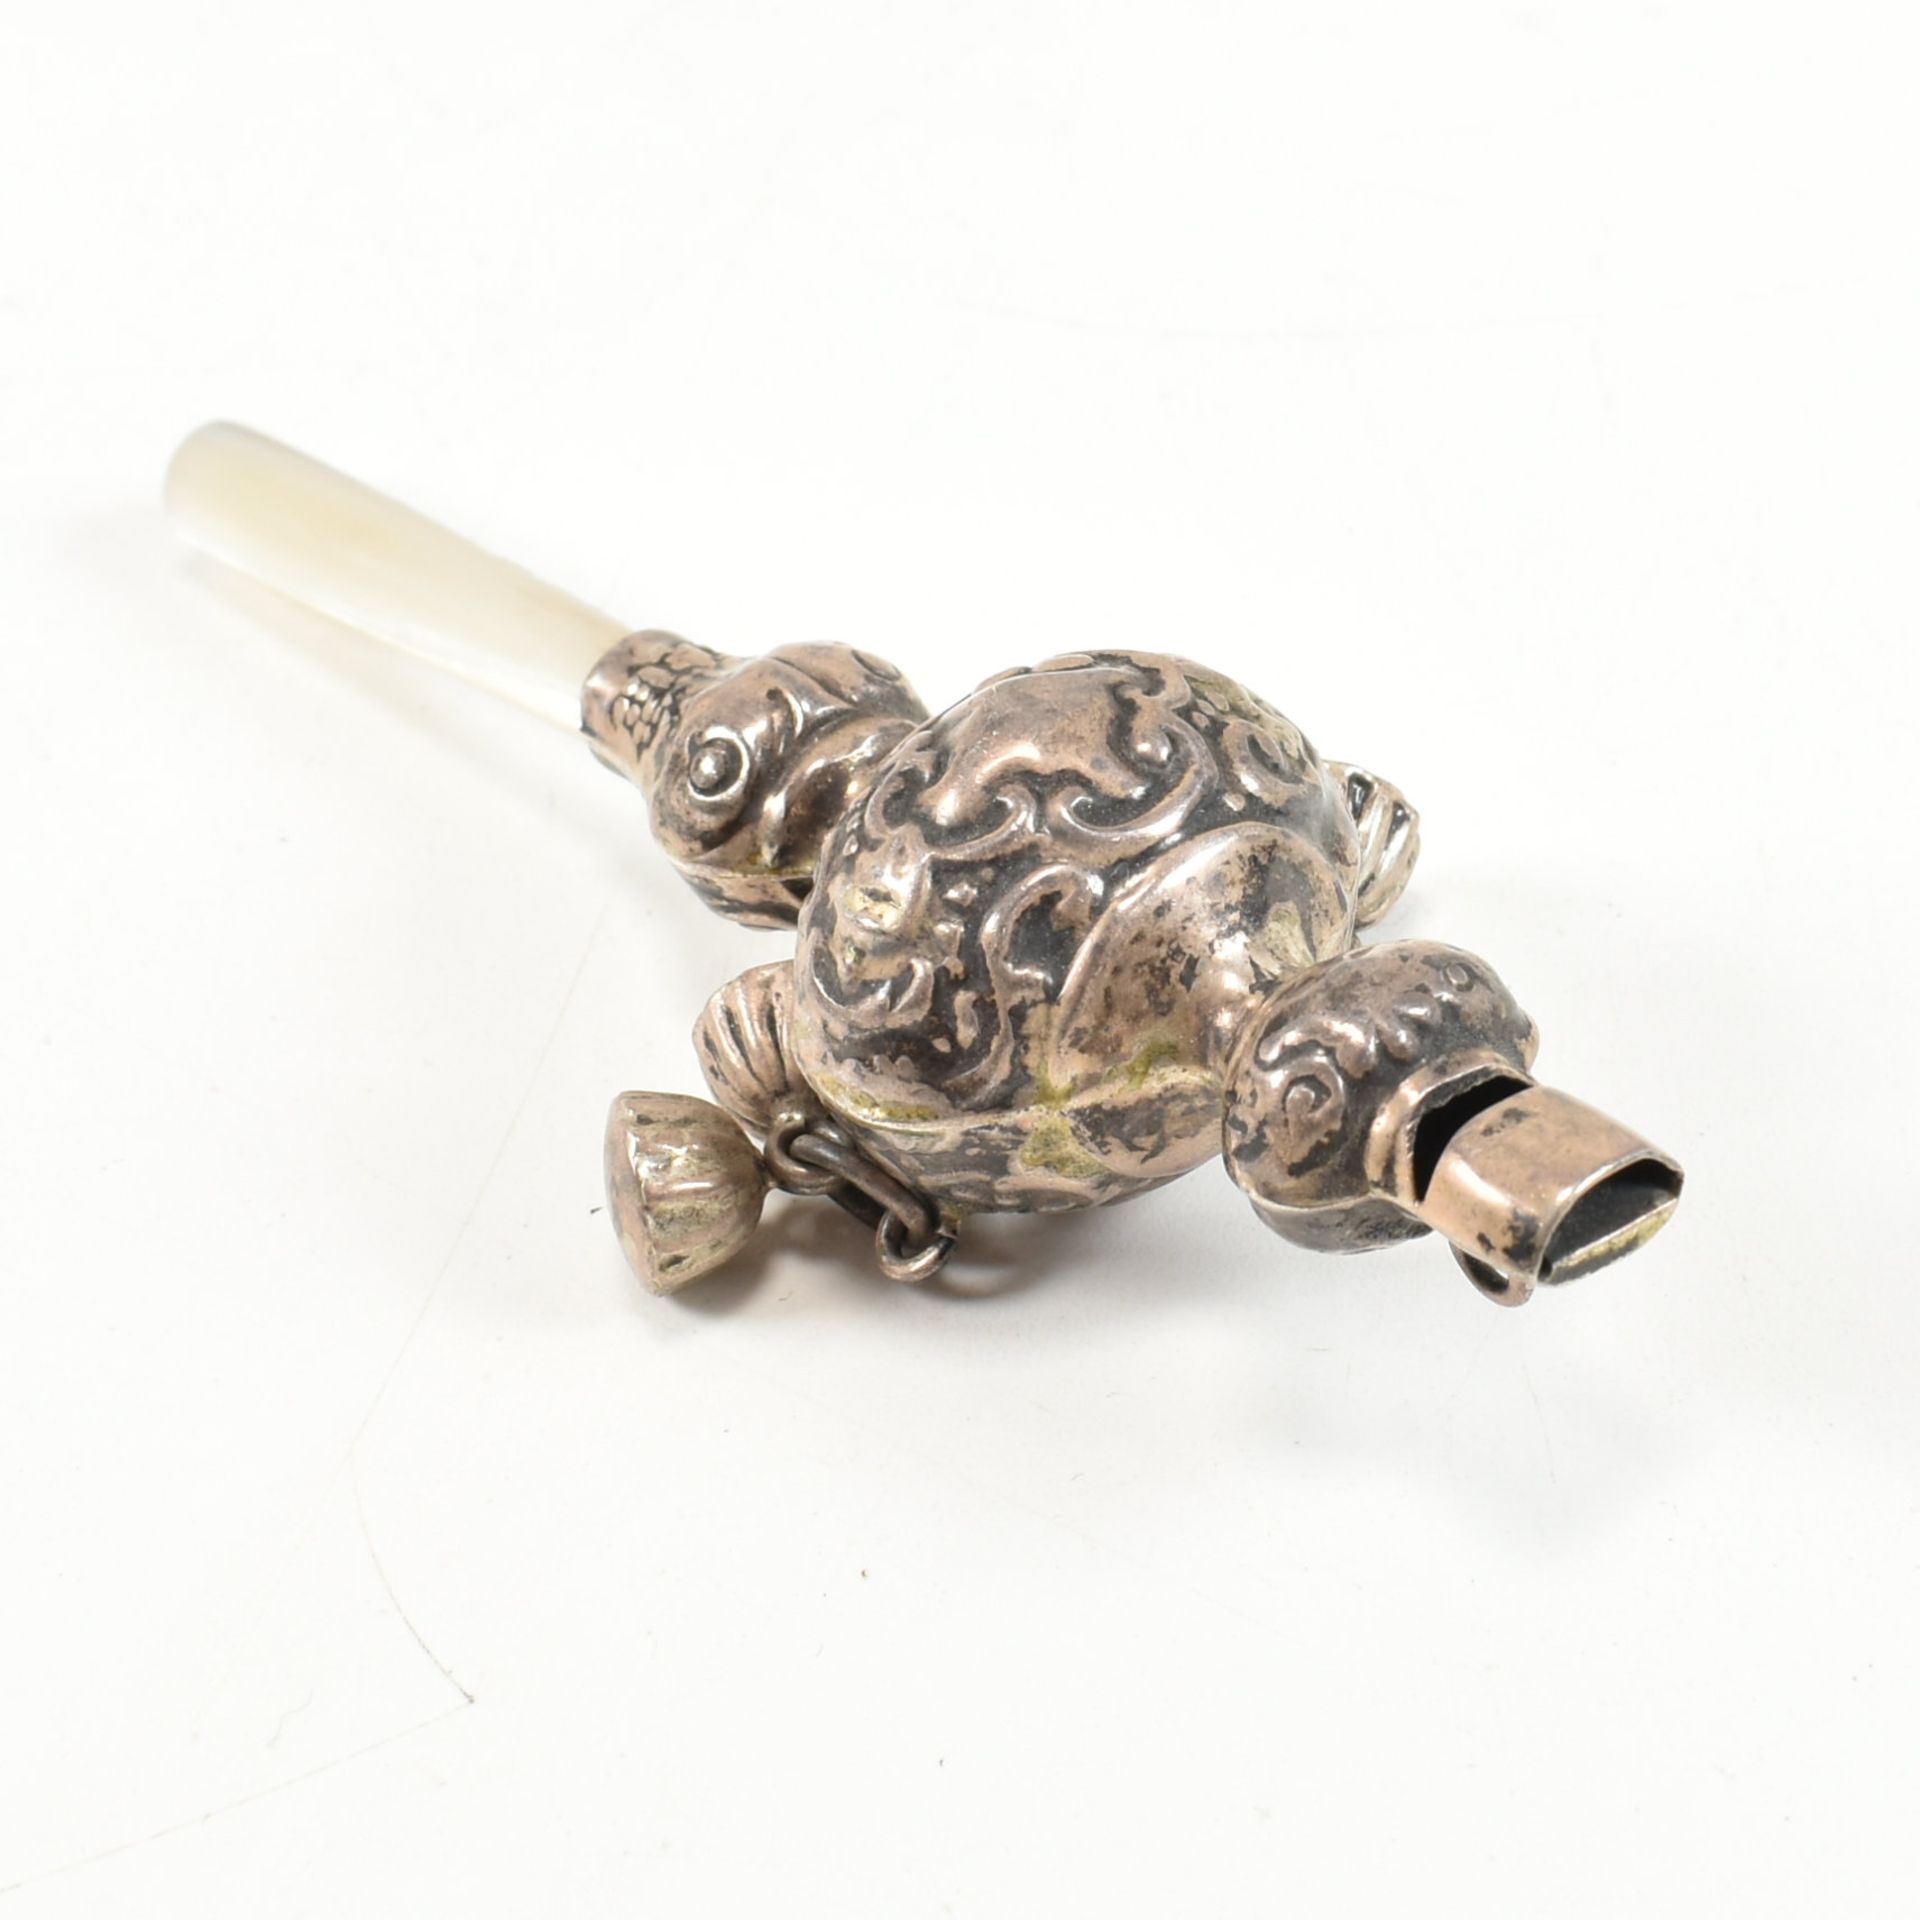 EDWARDIAN HALLMARKED SILVER & MOP BABYS RATTLE WHISTLE - Image 4 of 6